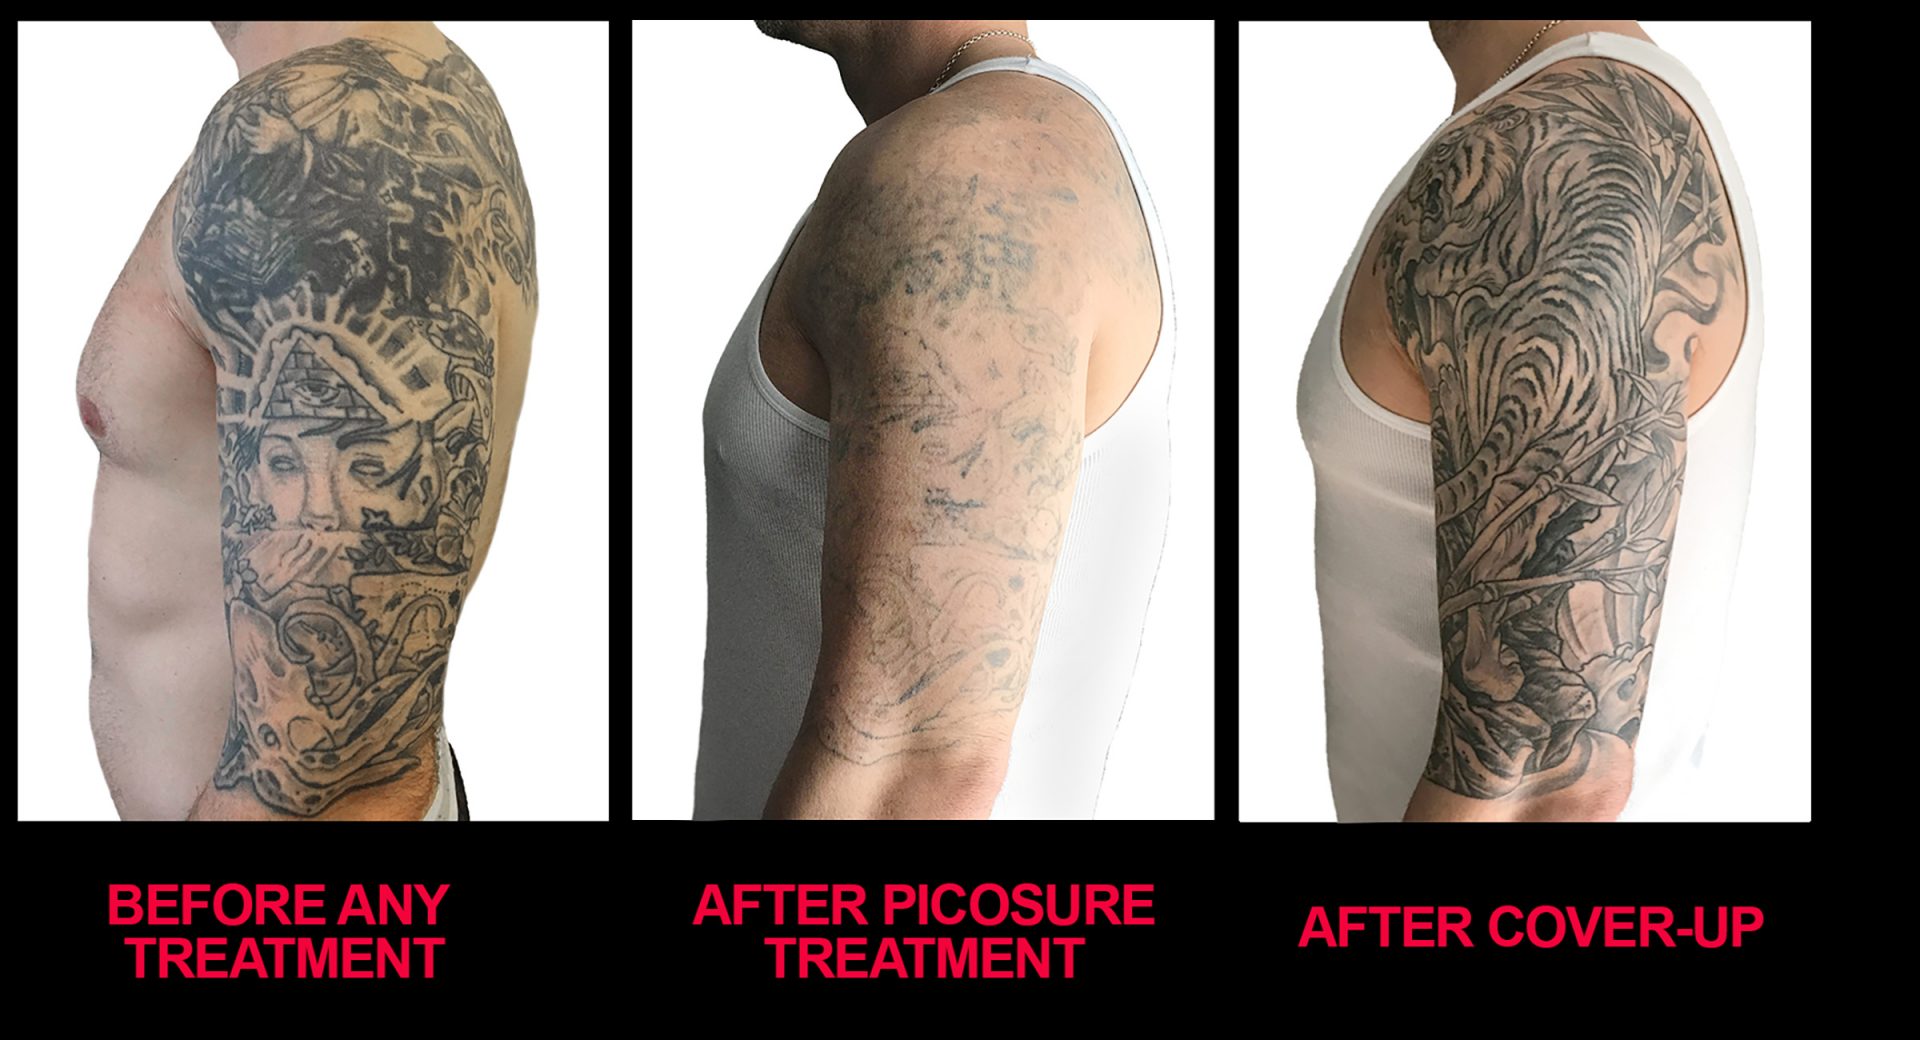 Tattoo Removal For Cover Up Tattoos | Laser Tattoo Removal